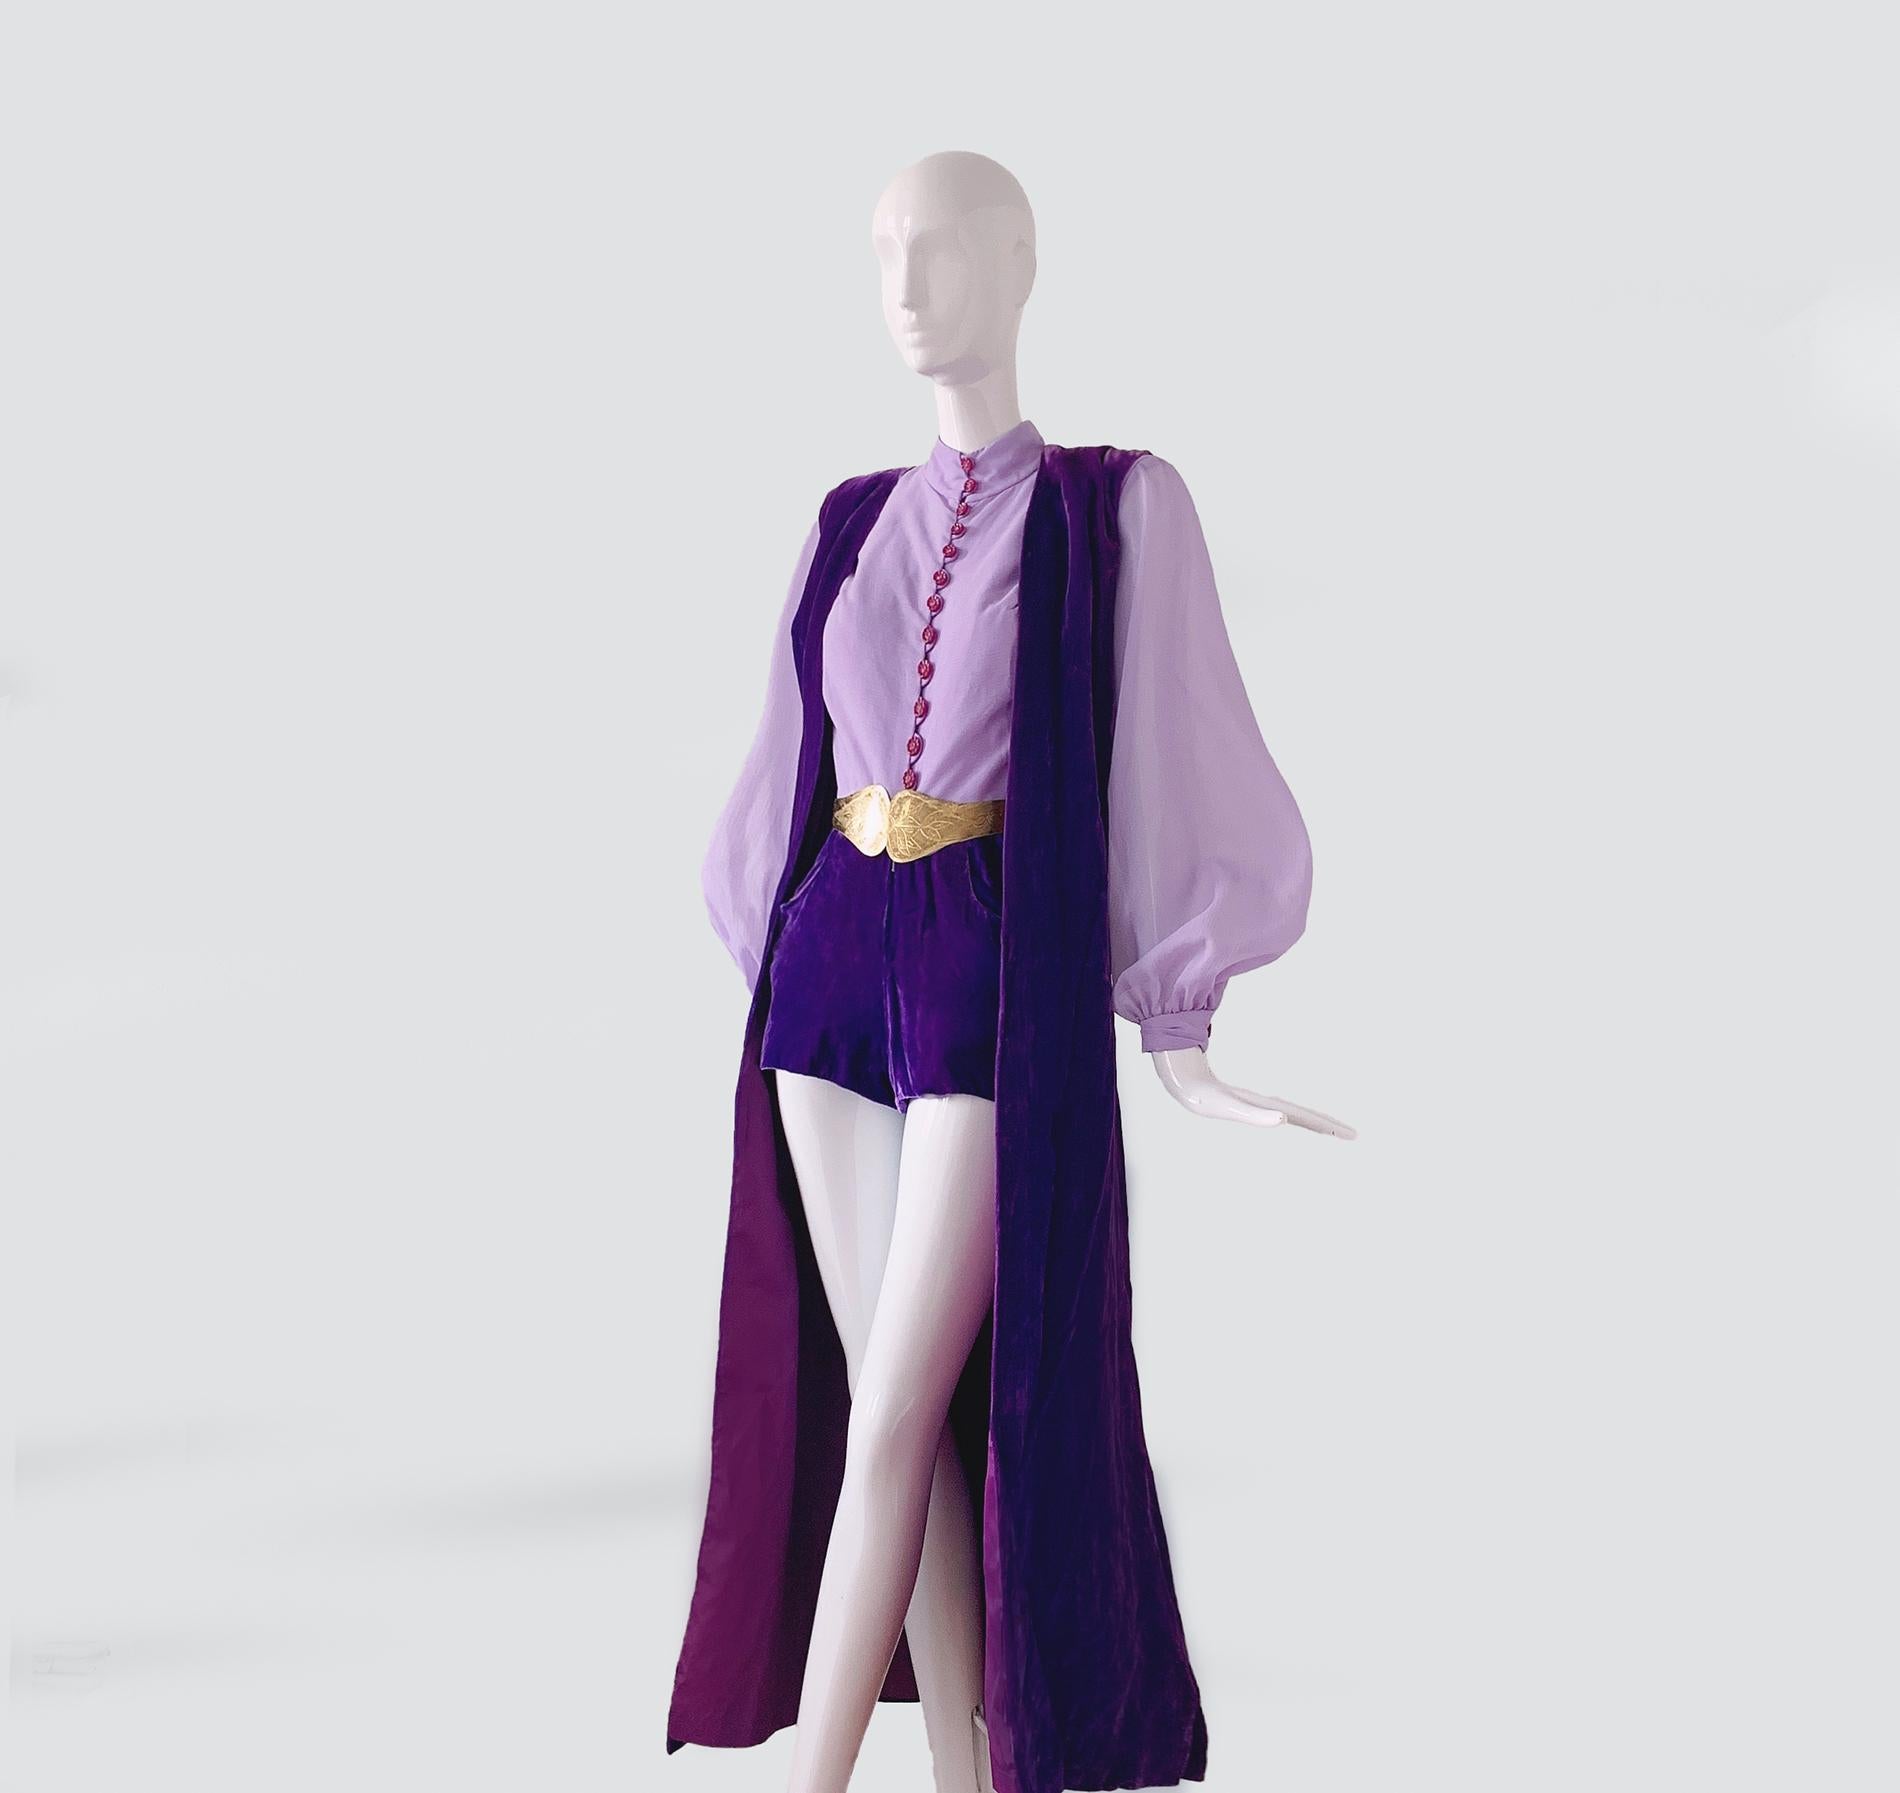 
So obsessed with this fabulous look!! A GORGEOUS one of a kind 1970s Glam two piece Ensemble in shades of purple/lilac  (belt not included).
Absolutely iconic and soo strong 70s glam vibes. Sexy mini romper with light pastel lilac blouse top and